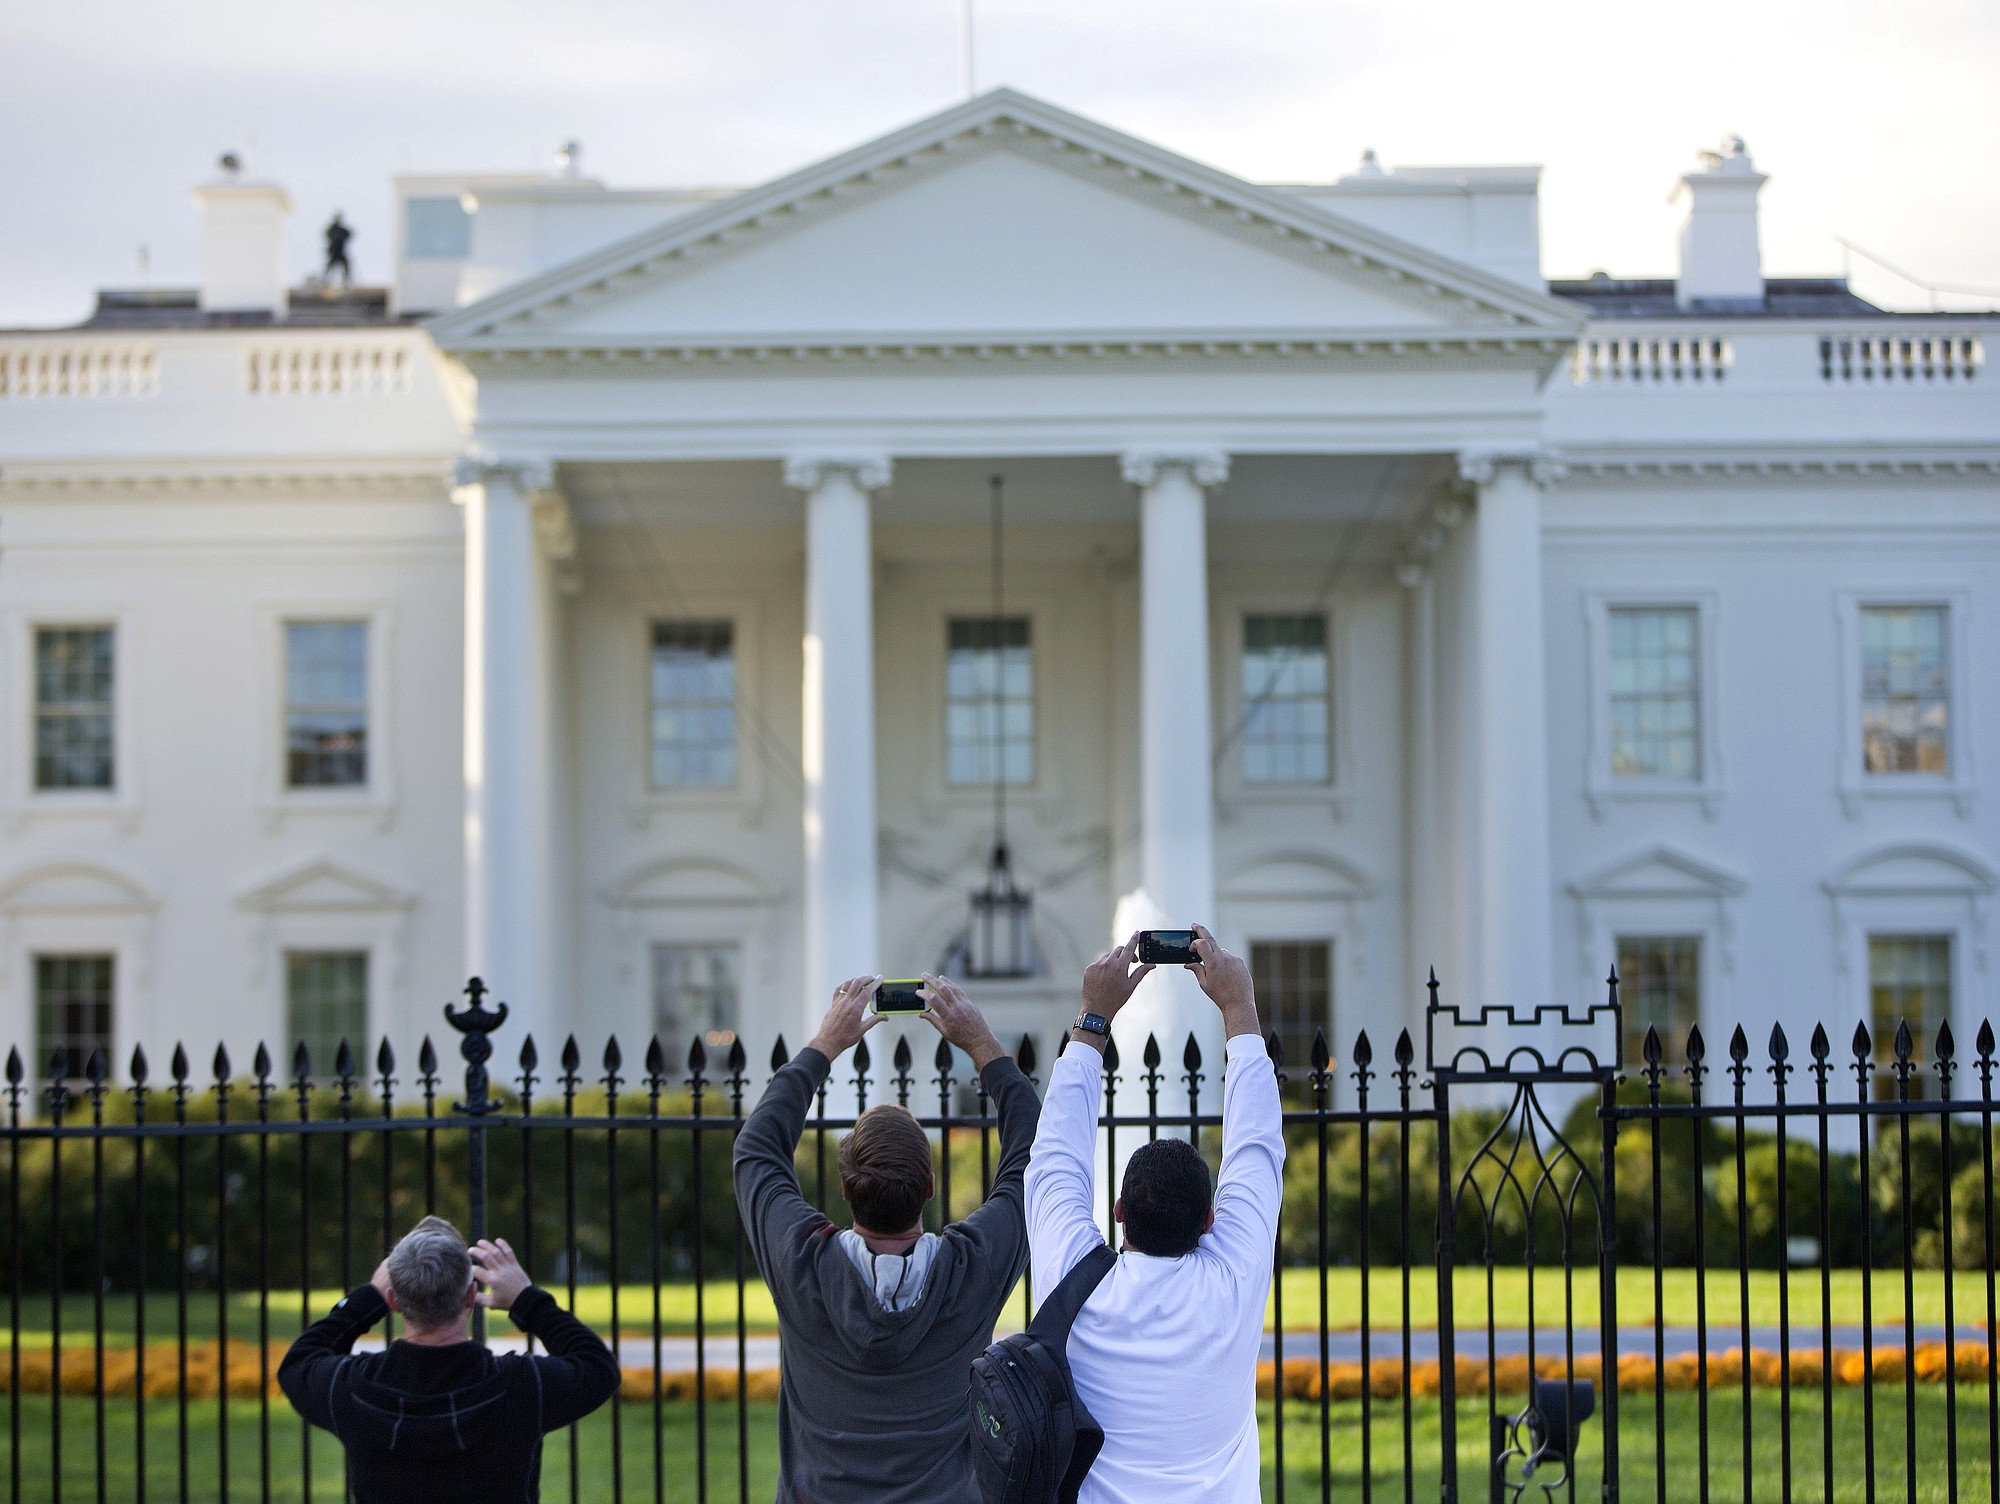 Visitors take photos of the White House on the sidewalk in front of the White House in Washington on Thursday.